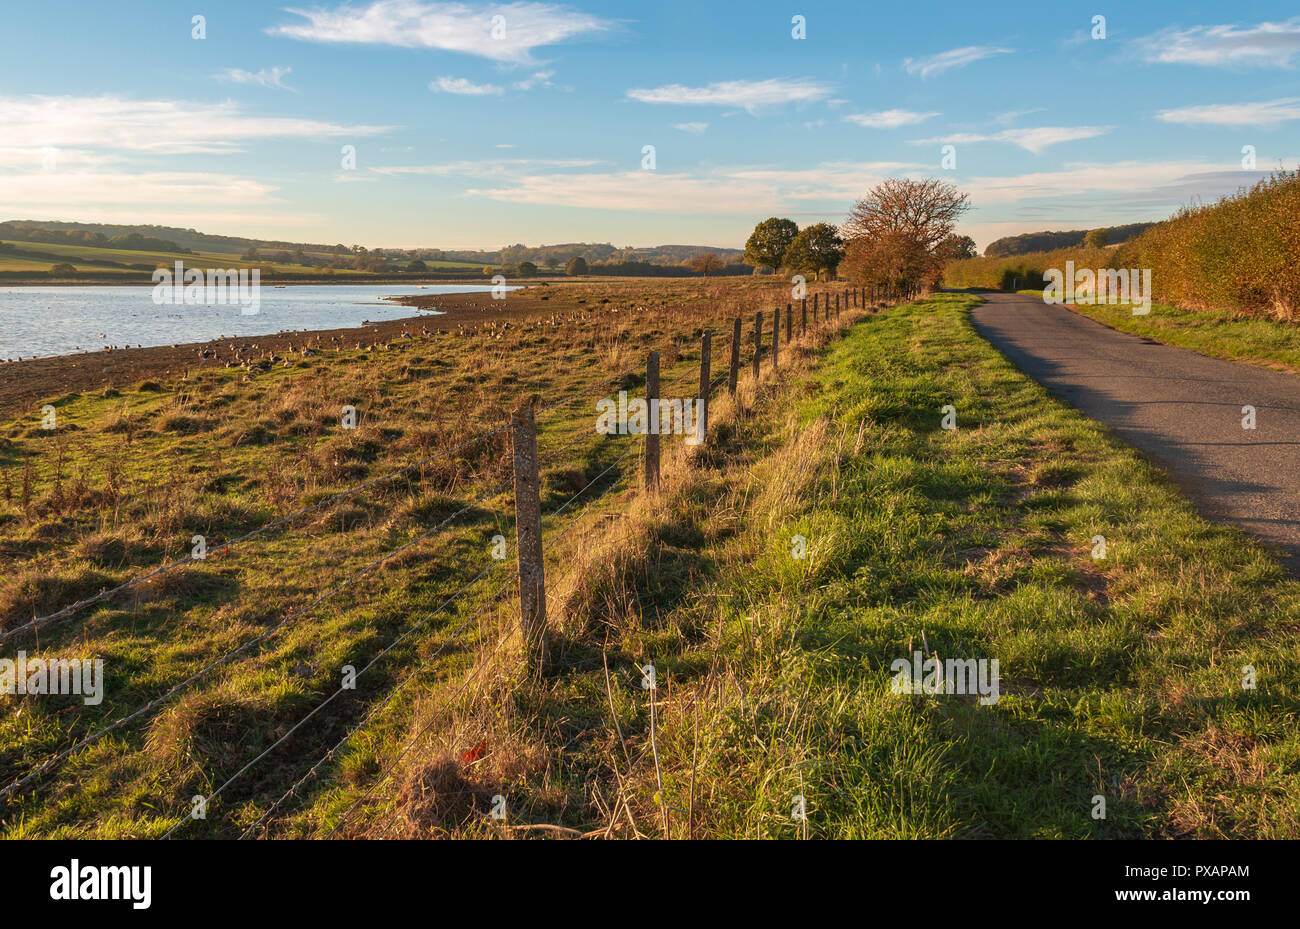 An image showing a section of the country road around Eyebrook Reservoir, Soke Dry, Rutland, England, UK Stock Photo